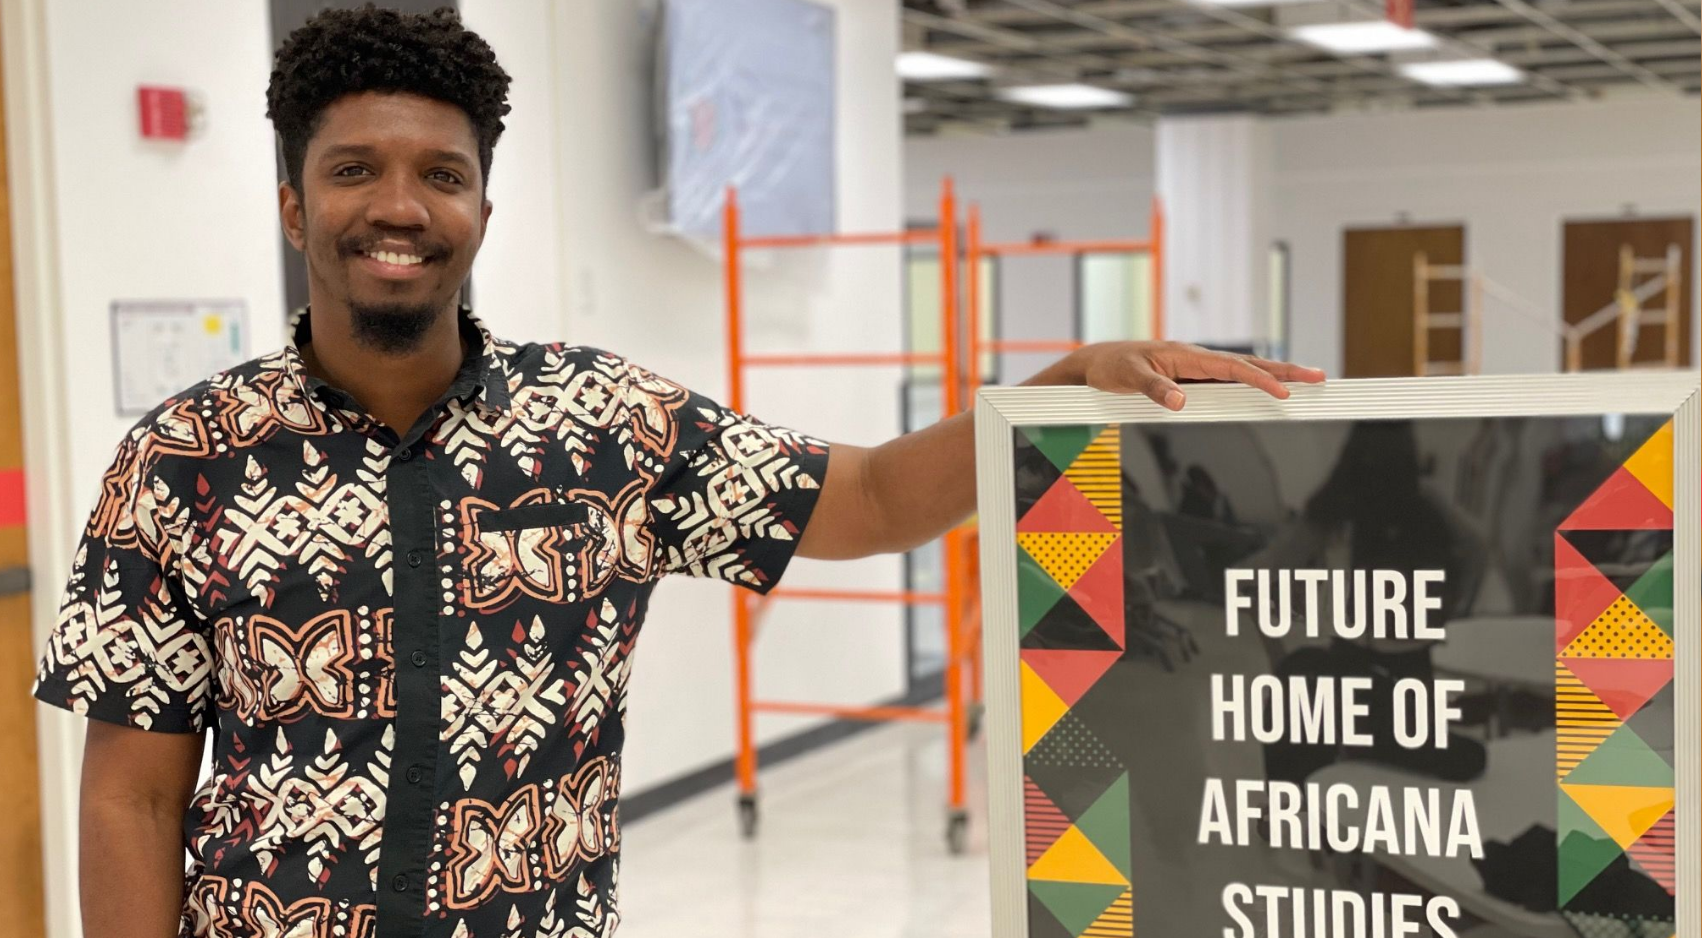 Taharka Ad, an assistant professor from Africana Studies, at the site of the expanded Africana Studies collection which will also feature new study rooms, tables, chairs and clustered seating. (SDSU)